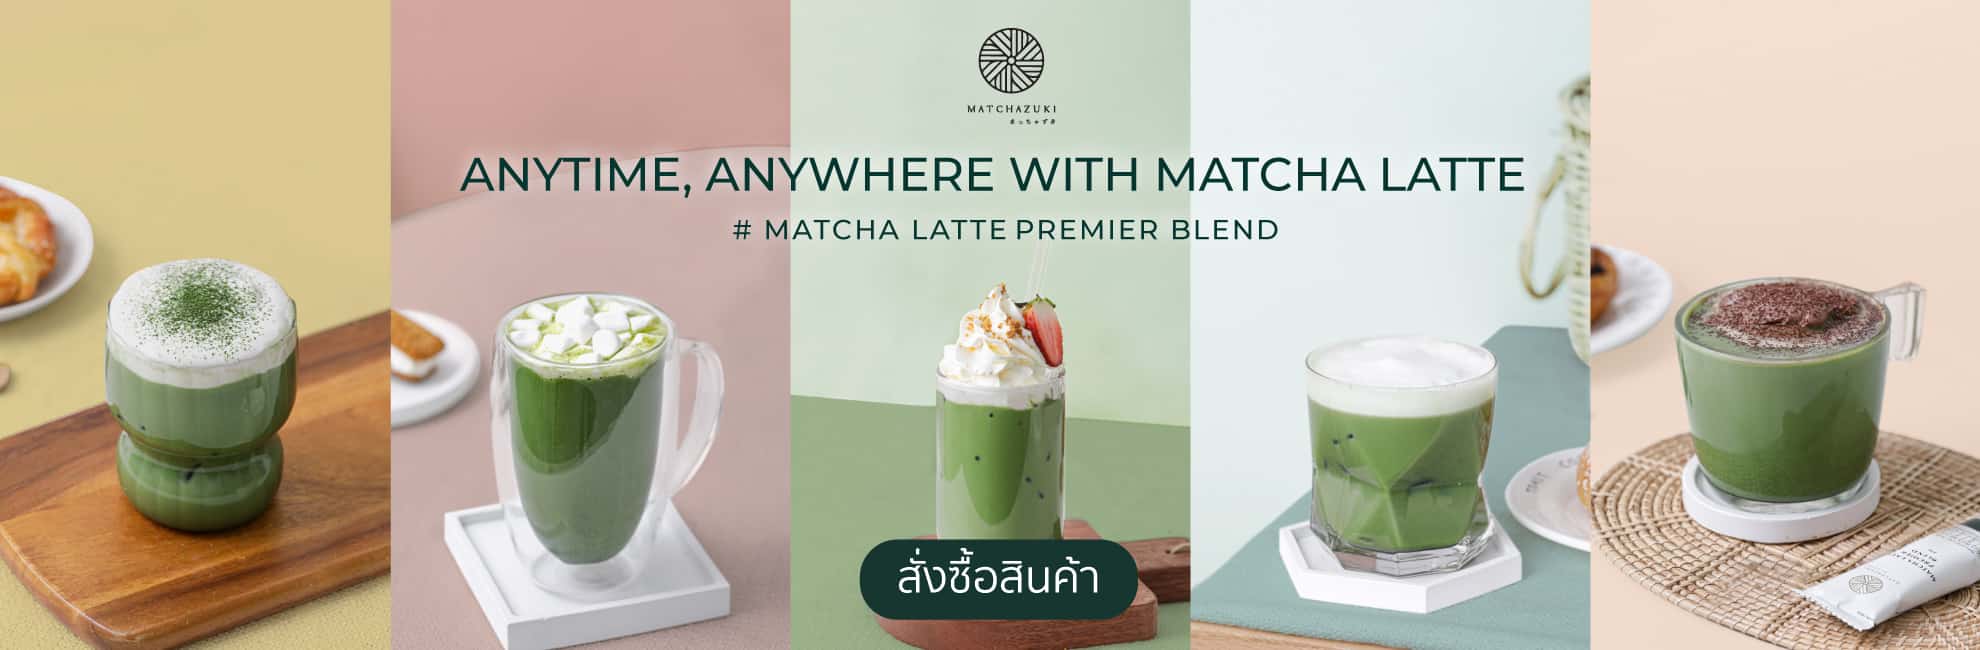 Everyday_Matcha_Latte_Home_Page-Thai